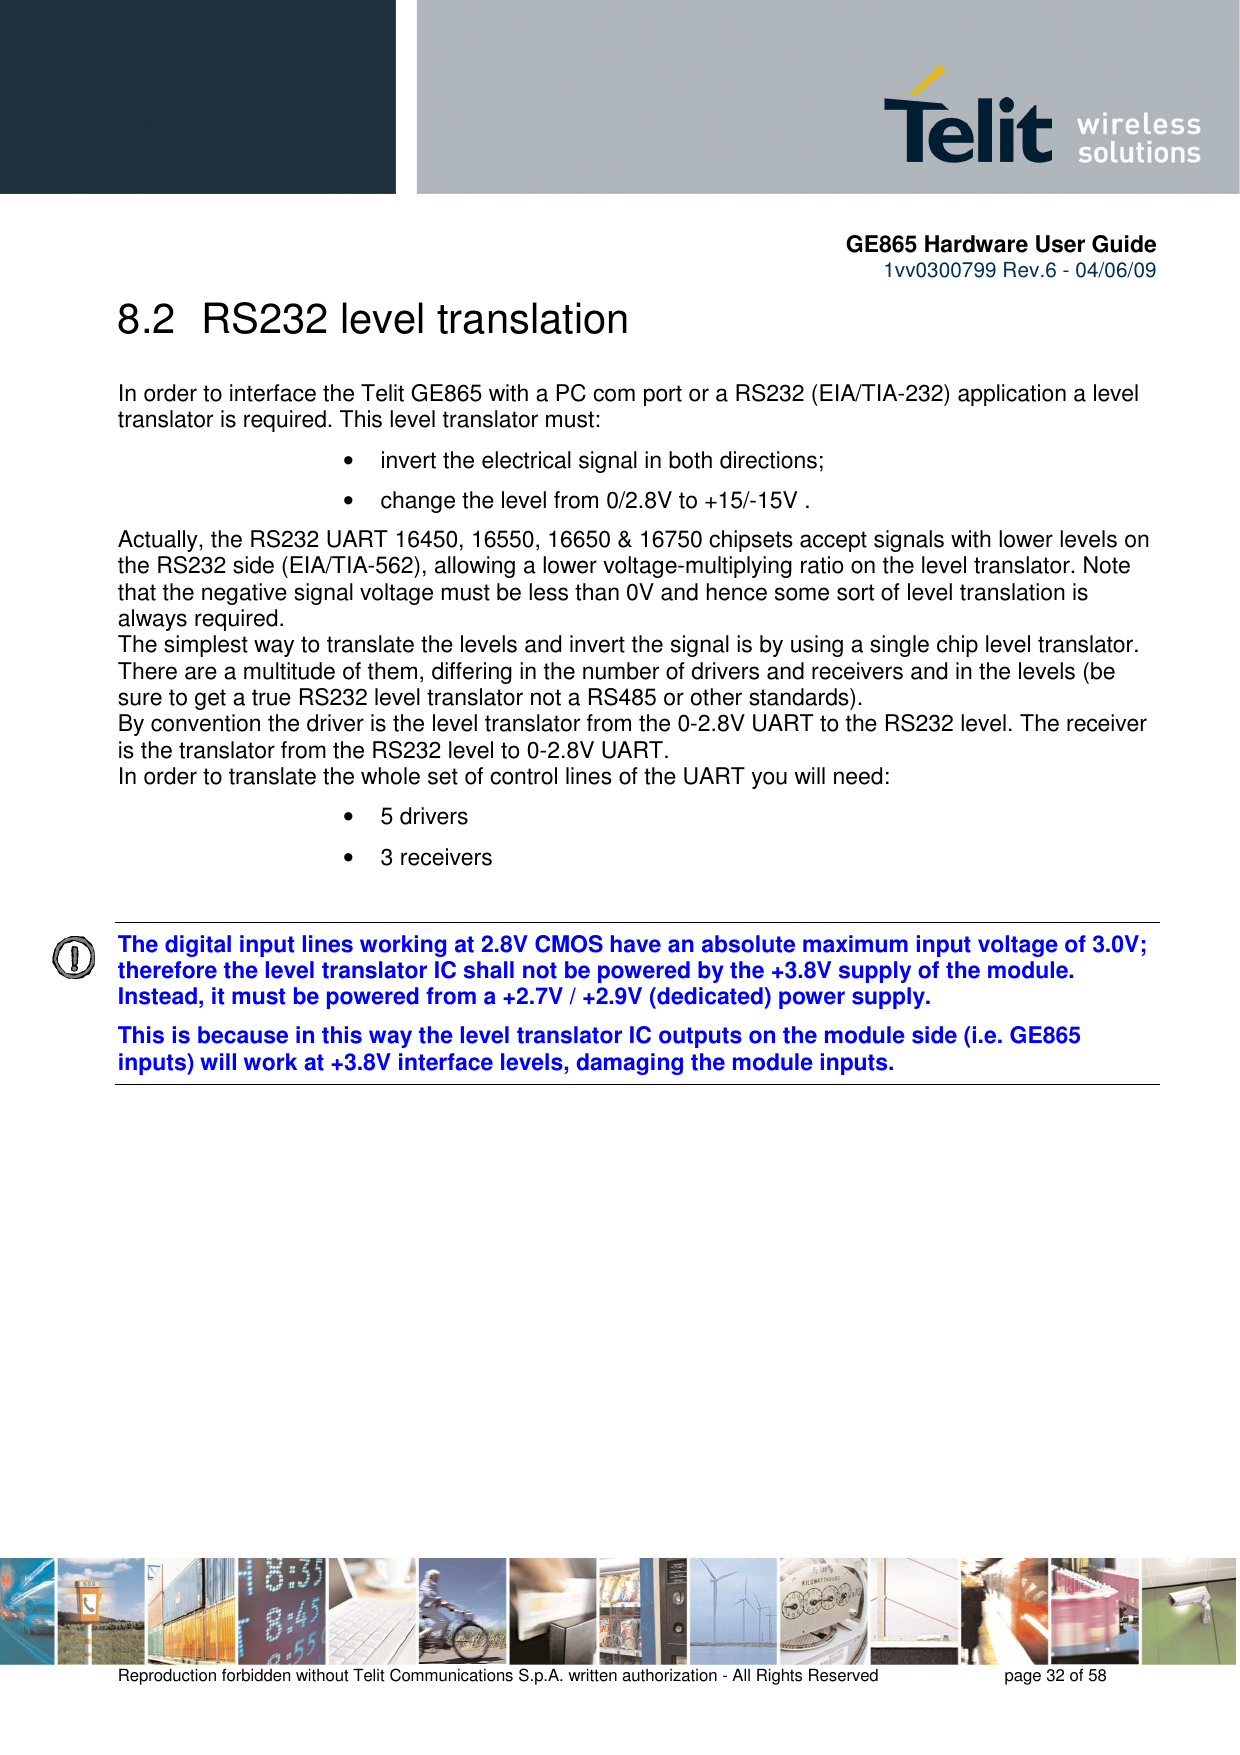       GE865 Hardware User Guide 1vv0300799 Rev.6 - 04/06/09      Reproduction forbidden without Telit Communications S.p.A. written authorization - All Rights Reserved    page 32 of 58  8.2  RS232 level translation In order to interface the Telit GE865 with a PC com port or a RS232 (EIA/TIA-232) application a level translator is required. This level translator must: •  invert the electrical signal in both directions; •  change the level from 0/2.8V to +15/-15V . Actually, the RS232 UART 16450, 16550, 16650 &amp; 16750 chipsets accept signals with lower levels on the RS232 side (EIA/TIA-562), allowing a lower voltage-multiplying ratio on the level translator. Note that the negative signal voltage must be less than 0V and hence some sort of level translation is always required.  The simplest way to translate the levels and invert the signal is by using a single chip level translator. There are a multitude of them, differing in the number of drivers and receivers and in the levels (be sure to get a true RS232 level translator not a RS485 or other standards). By convention the driver is the level translator from the 0-2.8V UART to the RS232 level. The receiver is the translator from the RS232 level to 0-2.8V UART. In order to translate the whole set of control lines of the UART you will need: •  5 drivers •  3 receivers  The digital input lines working at 2.8V CMOS have an absolute maximum input voltage of 3.0V; therefore the level translator IC shall not be powered by the +3.8V supply of the module. Instead, it must be powered from a +2.7V / +2.9V (dedicated) power supply. This is because in this way the level translator IC outputs on the module side (i.e. GE865 inputs) will work at +3.8V interface levels, damaging the module inputs.   